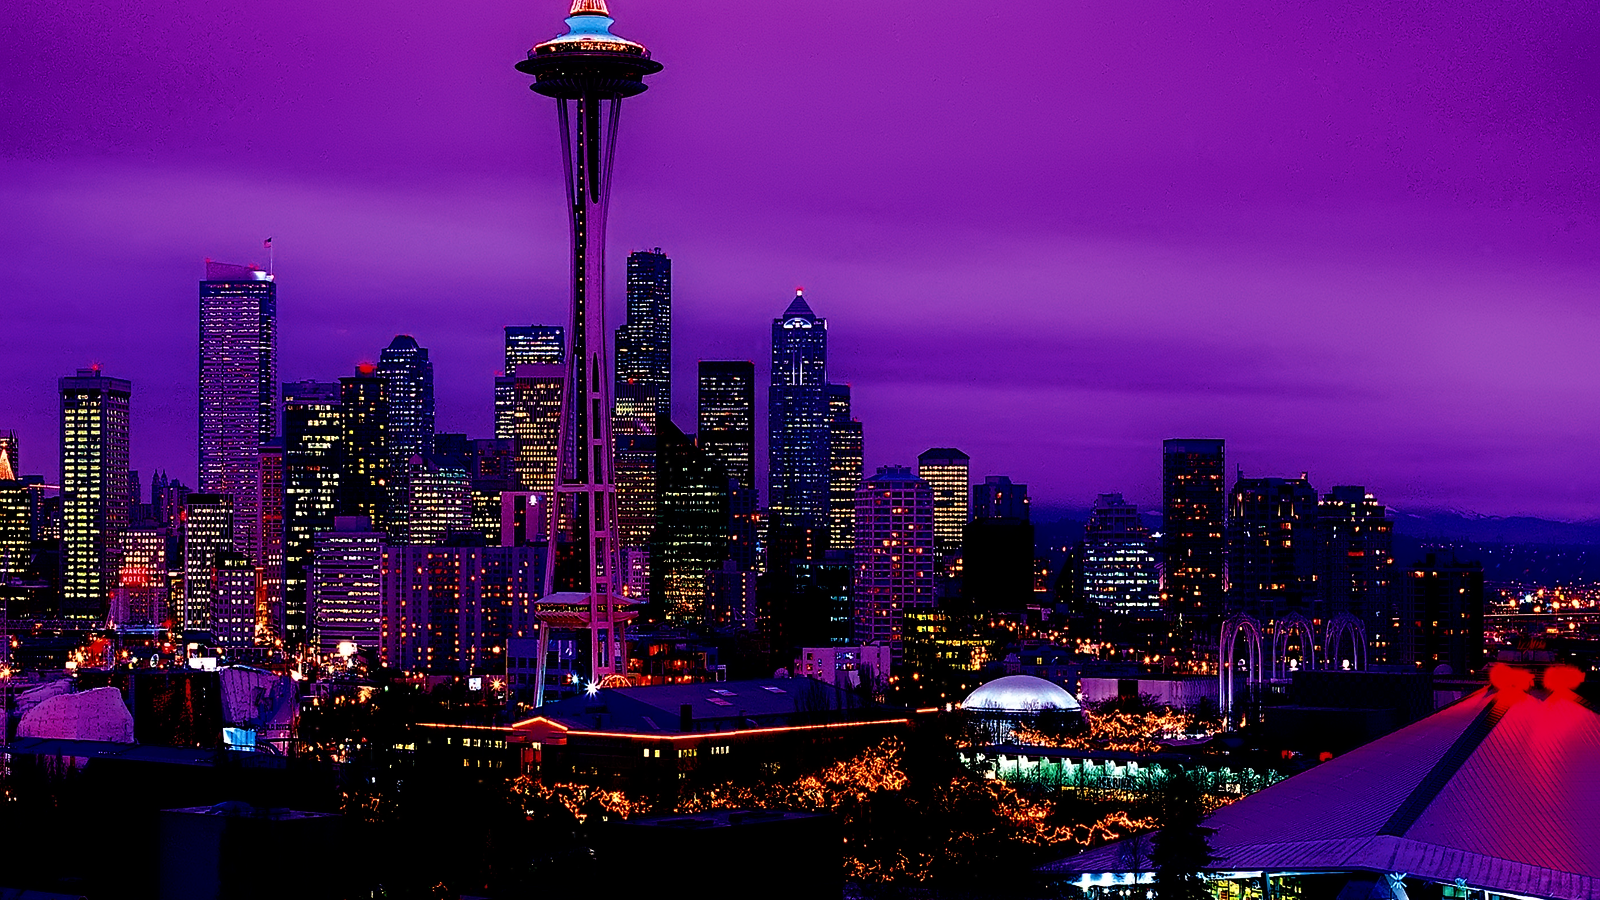 Free download Seattle Night Skyline wallpaper Republicans Immigration and [1600x1200] for your Desktop, Mobile & Tablet. Explore Seattle at Night Wallpaper. Seattle Skyline Wallpaper, Free Seattle Mariners Wallpaper, Seattle 1080p Wallpaper